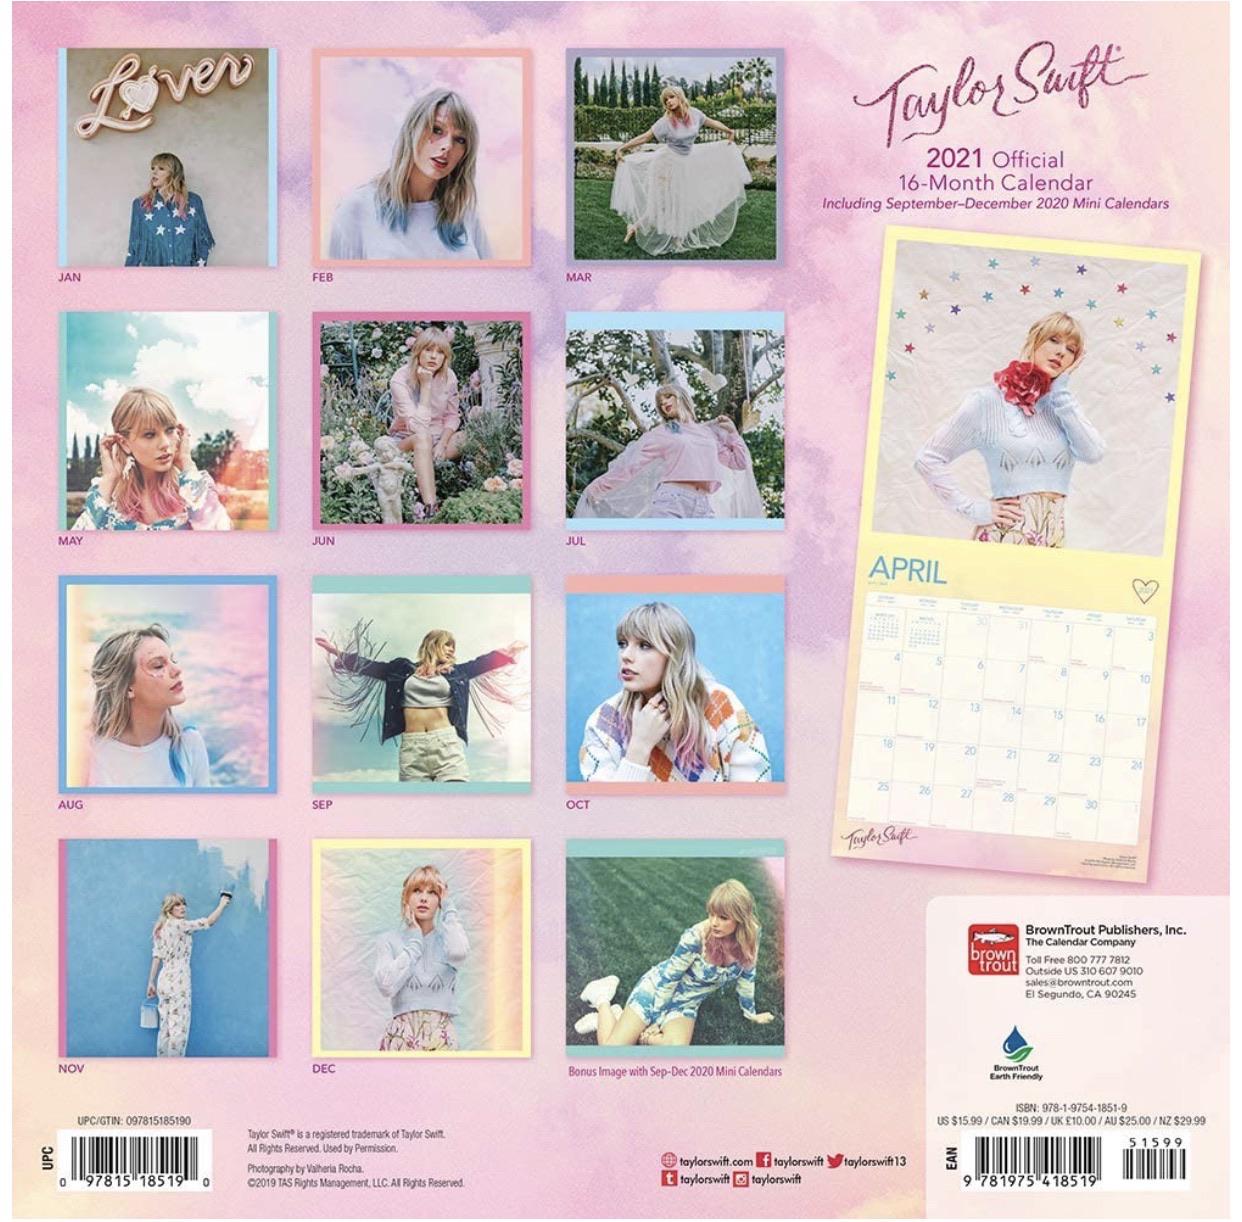 The Taylor Swift Calendar for 2021 is now available for preorder on Amazon!